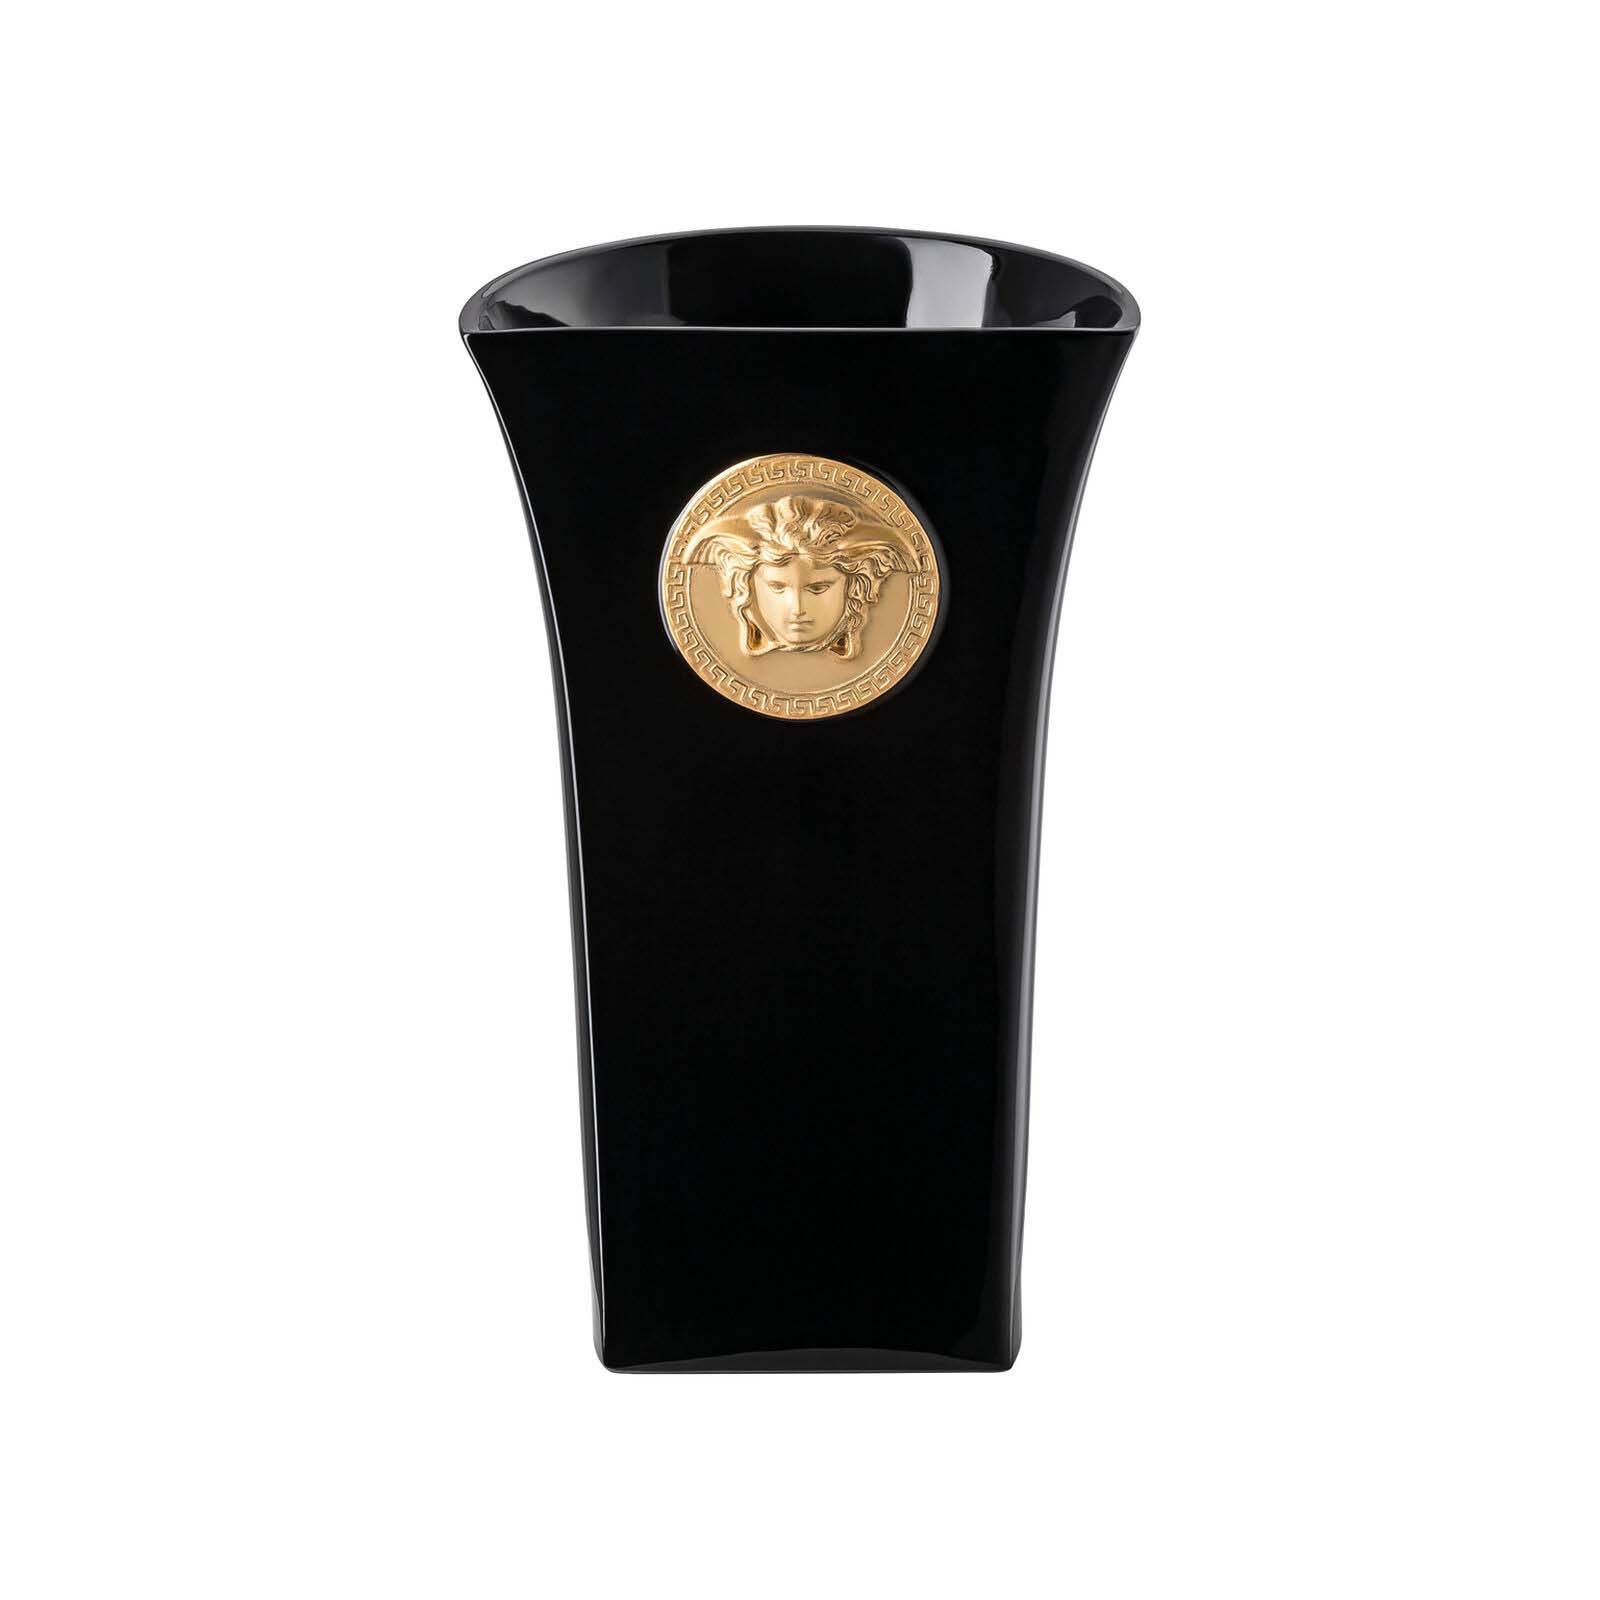 Versace Vase. Discover how the Bauhaus influenced design history